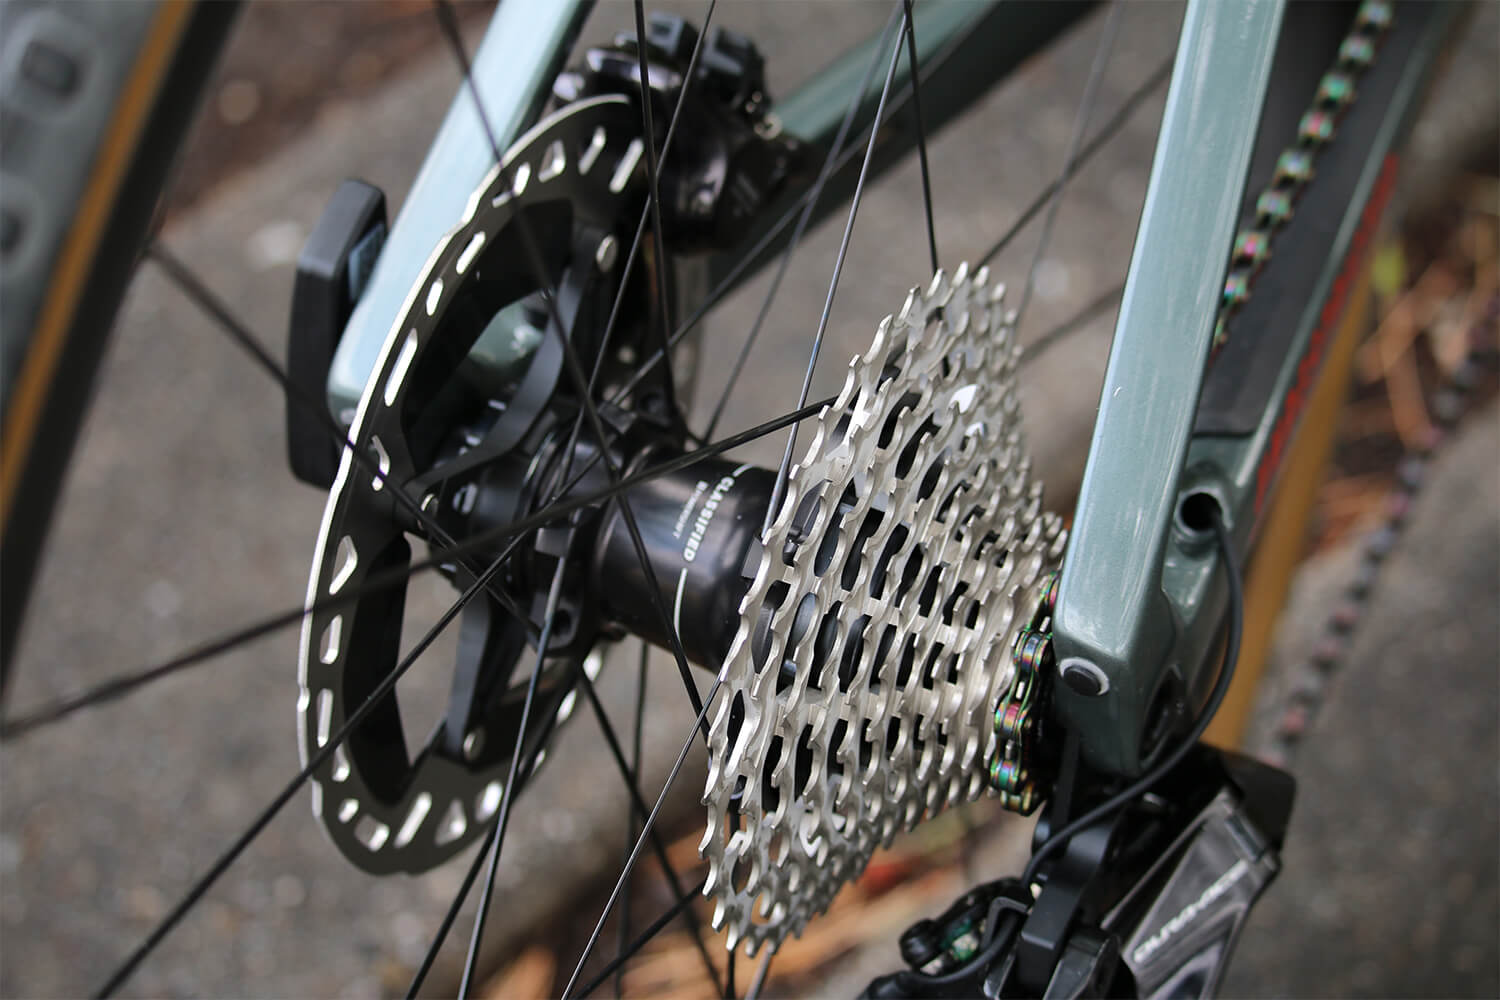 Classified Powershift Hub Contender Bicycles cassette detail